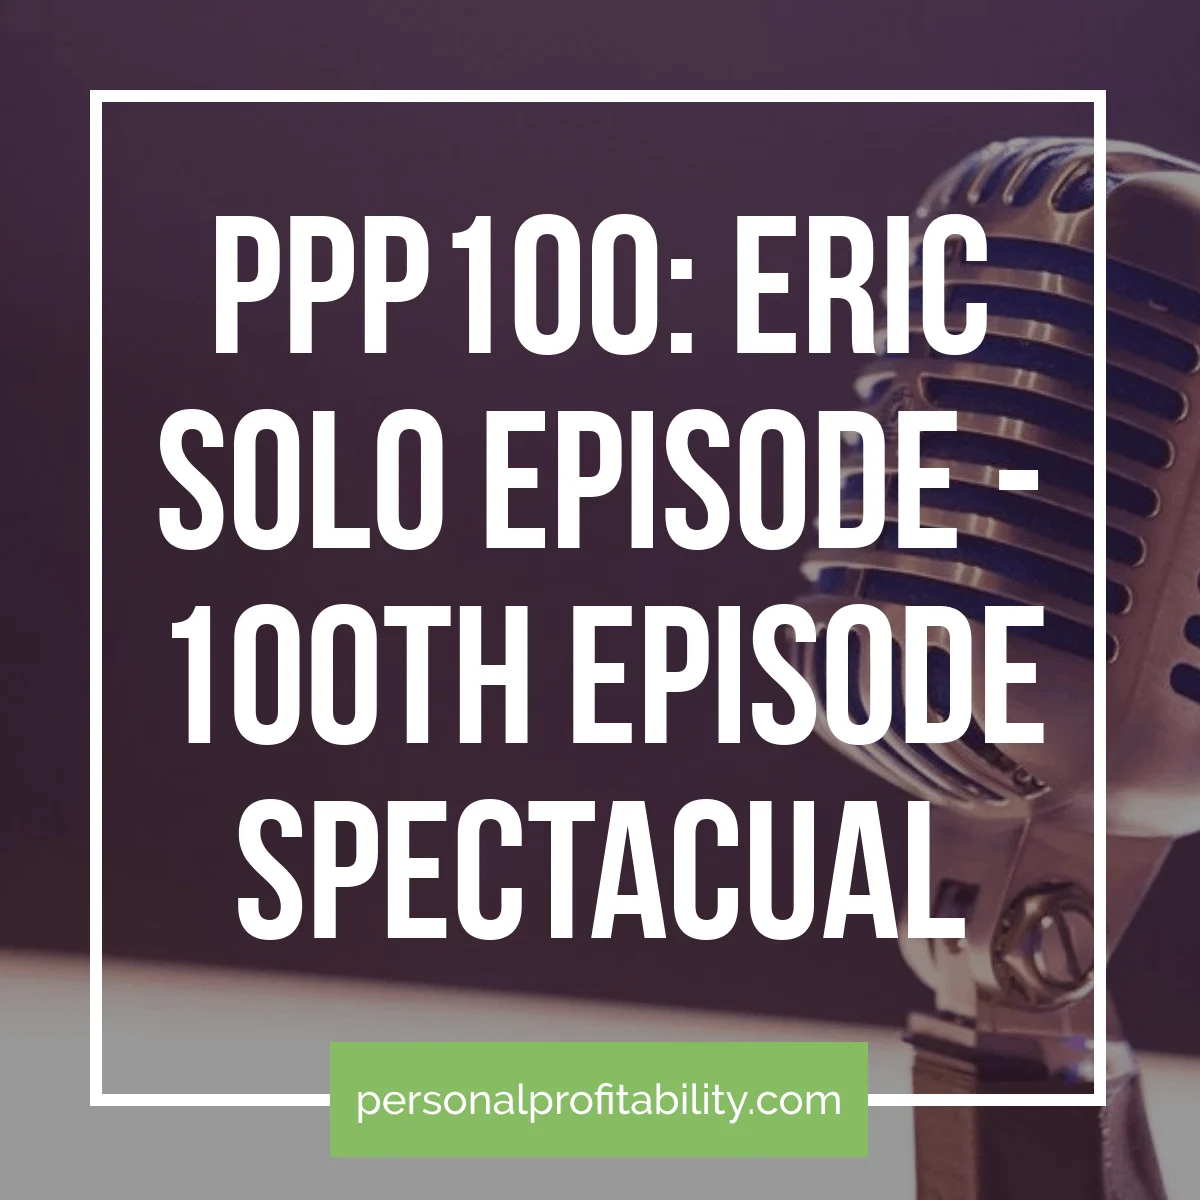 Hey everyone, welcome to episode 100! It's the 100th episode spectacual - and I have a BIG announcement (you might even notice it before I say it!) plus some other things to share. Getting to episode 100 is so exciting and humbling, and while this episode isn't very long, I want to share two of the biggest things I've learned since blogging and podcasting (since 2015!).